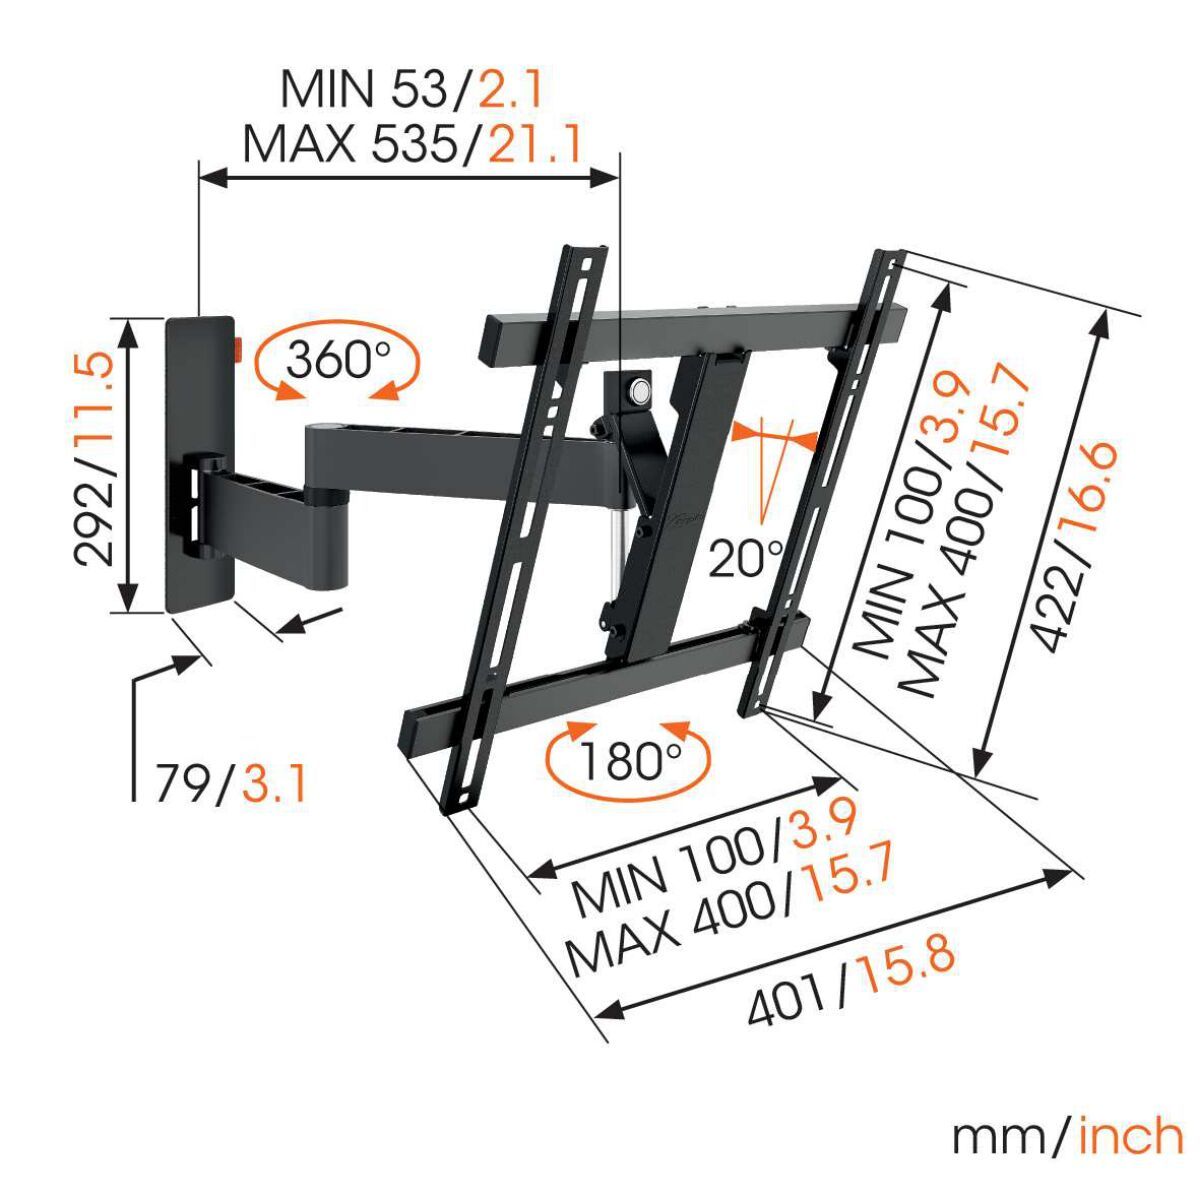 Vogel's W53070 Full-Motion TV Wall Mount (black) - Suitable for 32 up to 55 inch TVs - Full motion (up to 180°) - Tilt up to 20° - Dimensions